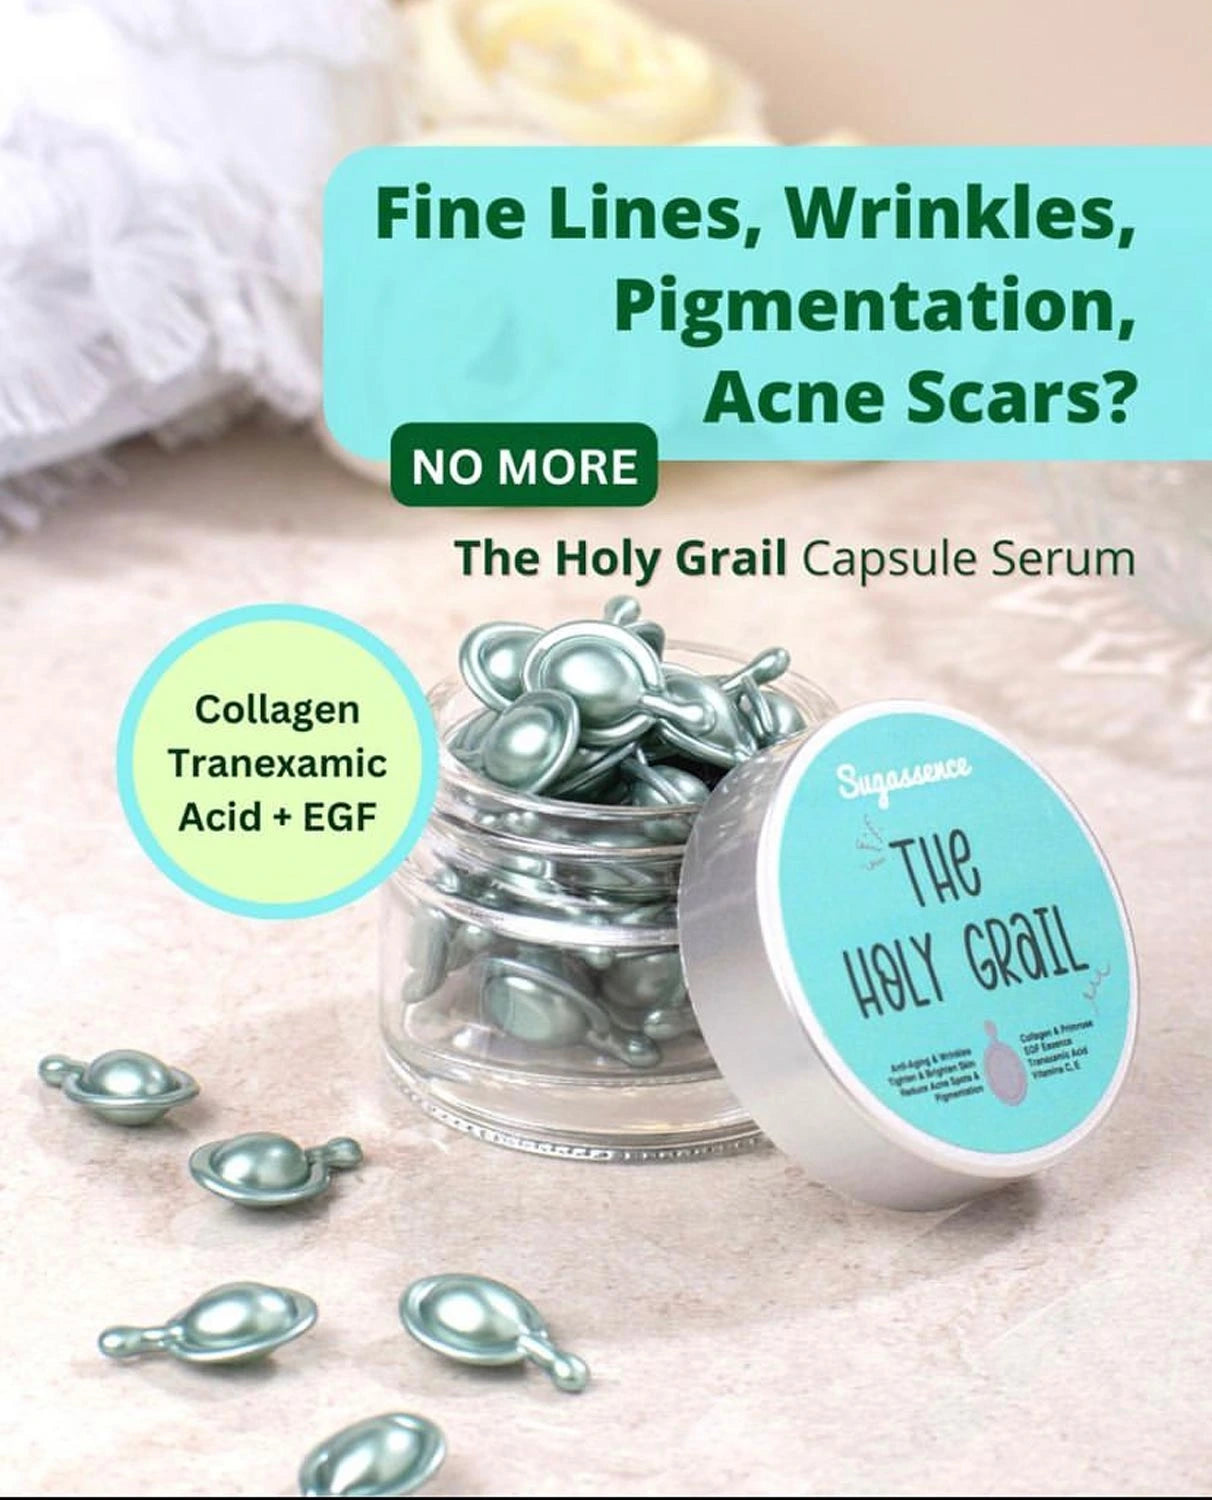 The Holy Grail – Youthful Serum